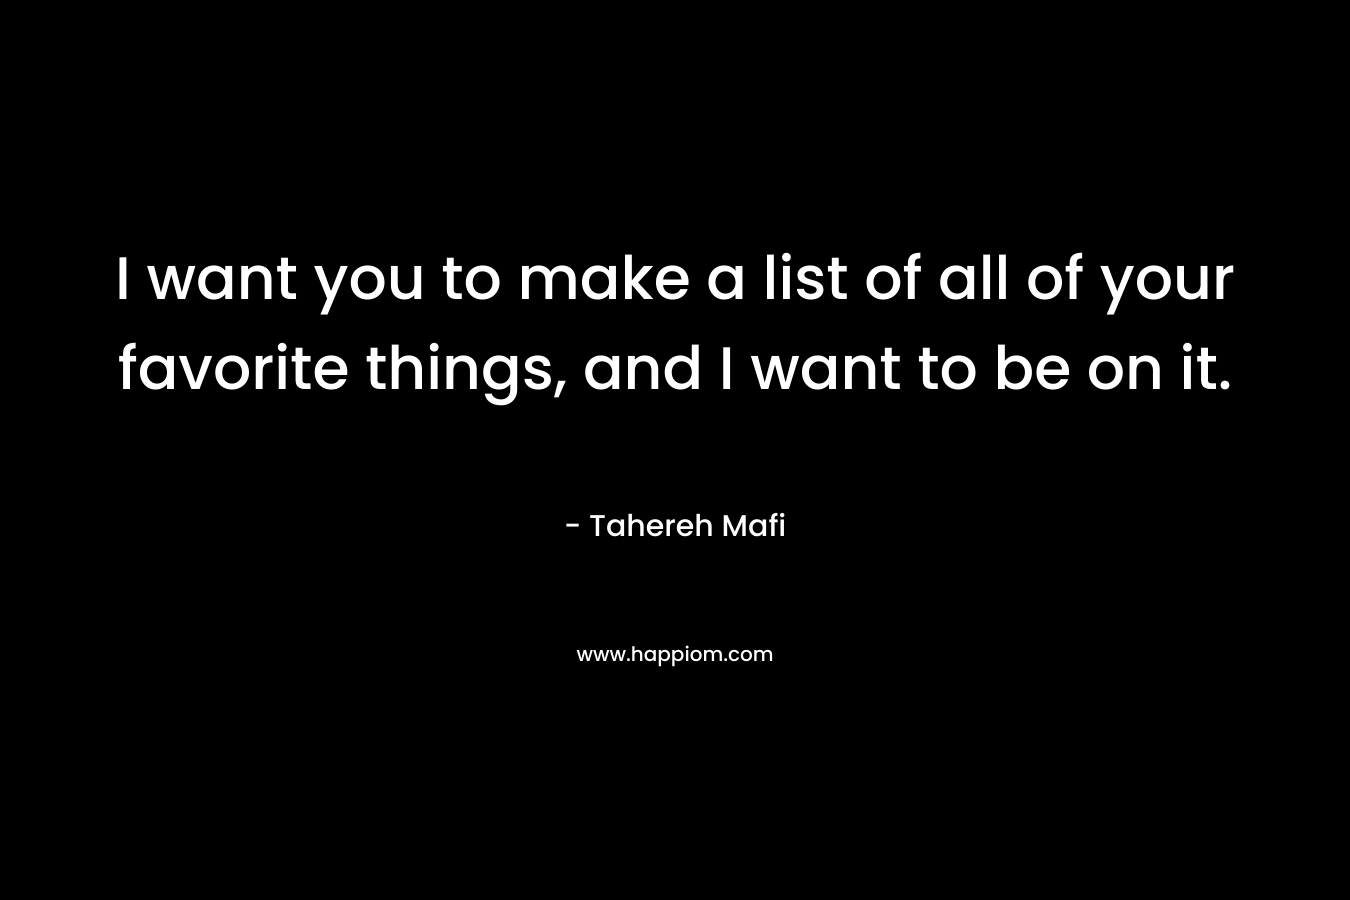 I want you to make a list of all of your favorite things, and I want to be on it.